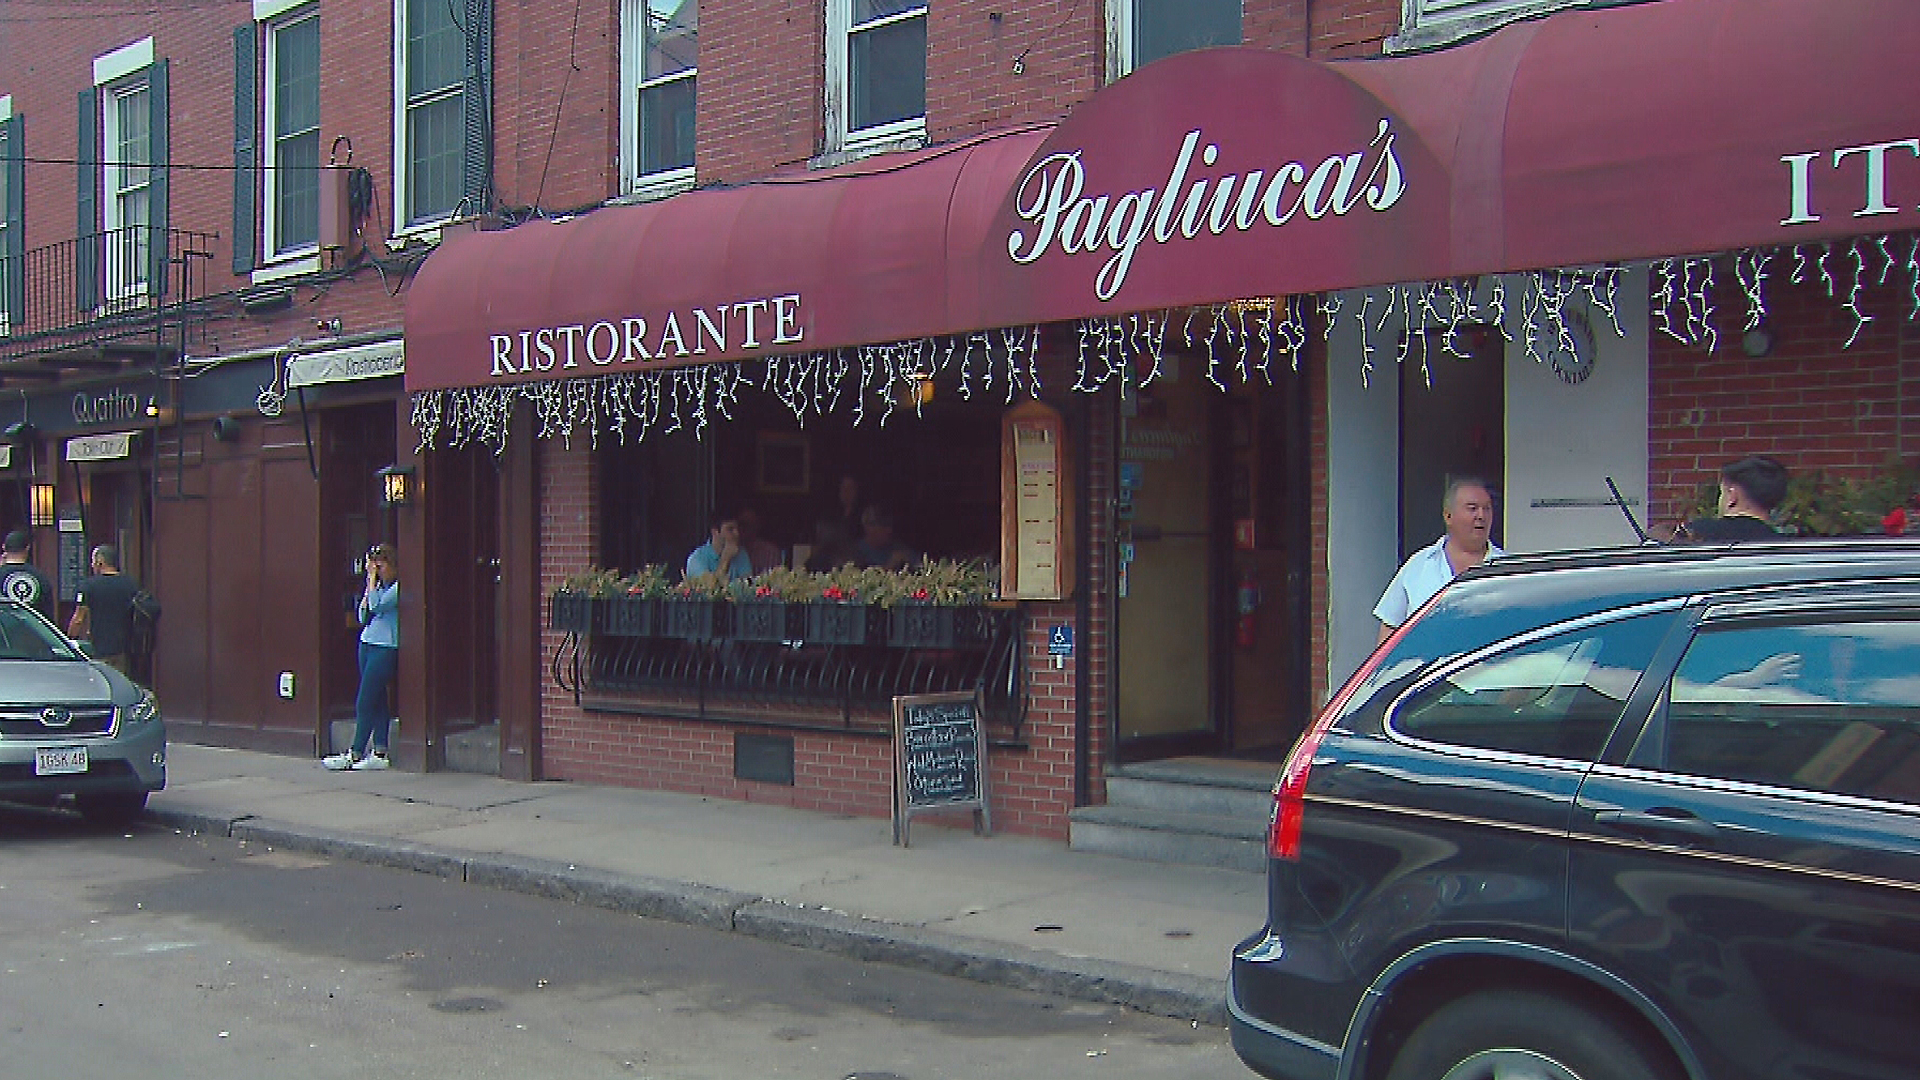 ‘It’s Disgusting’: Restaurant Owners Furious Over New Outdoor Dining Fees, Regulations